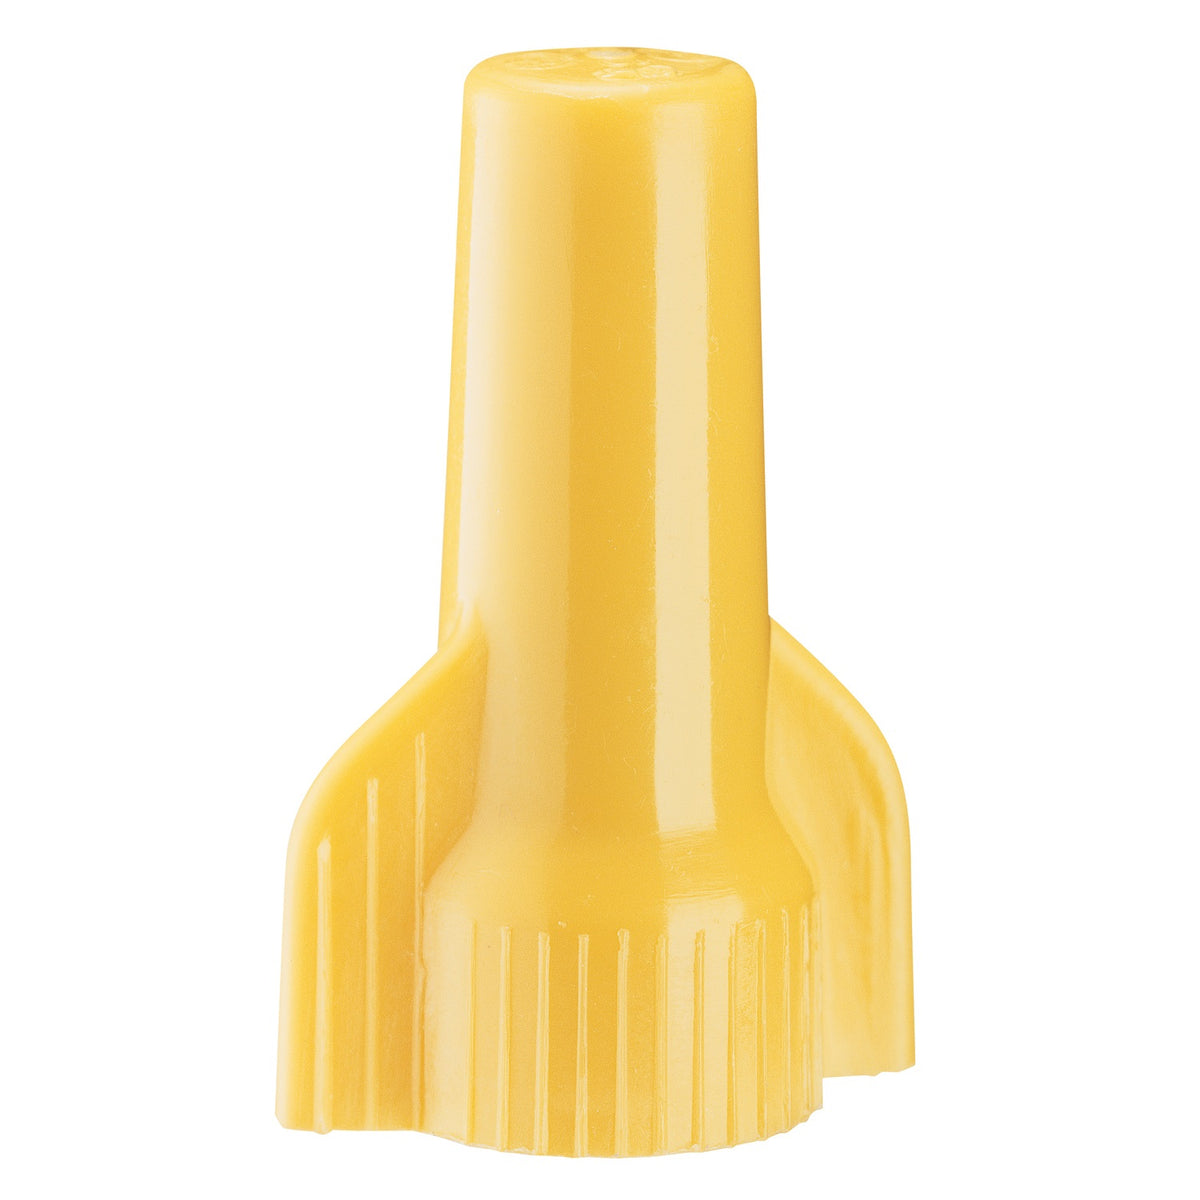 Gardner Bender 17-084 Winggard Wire Connector, 22 - 10 AWG, Yellow